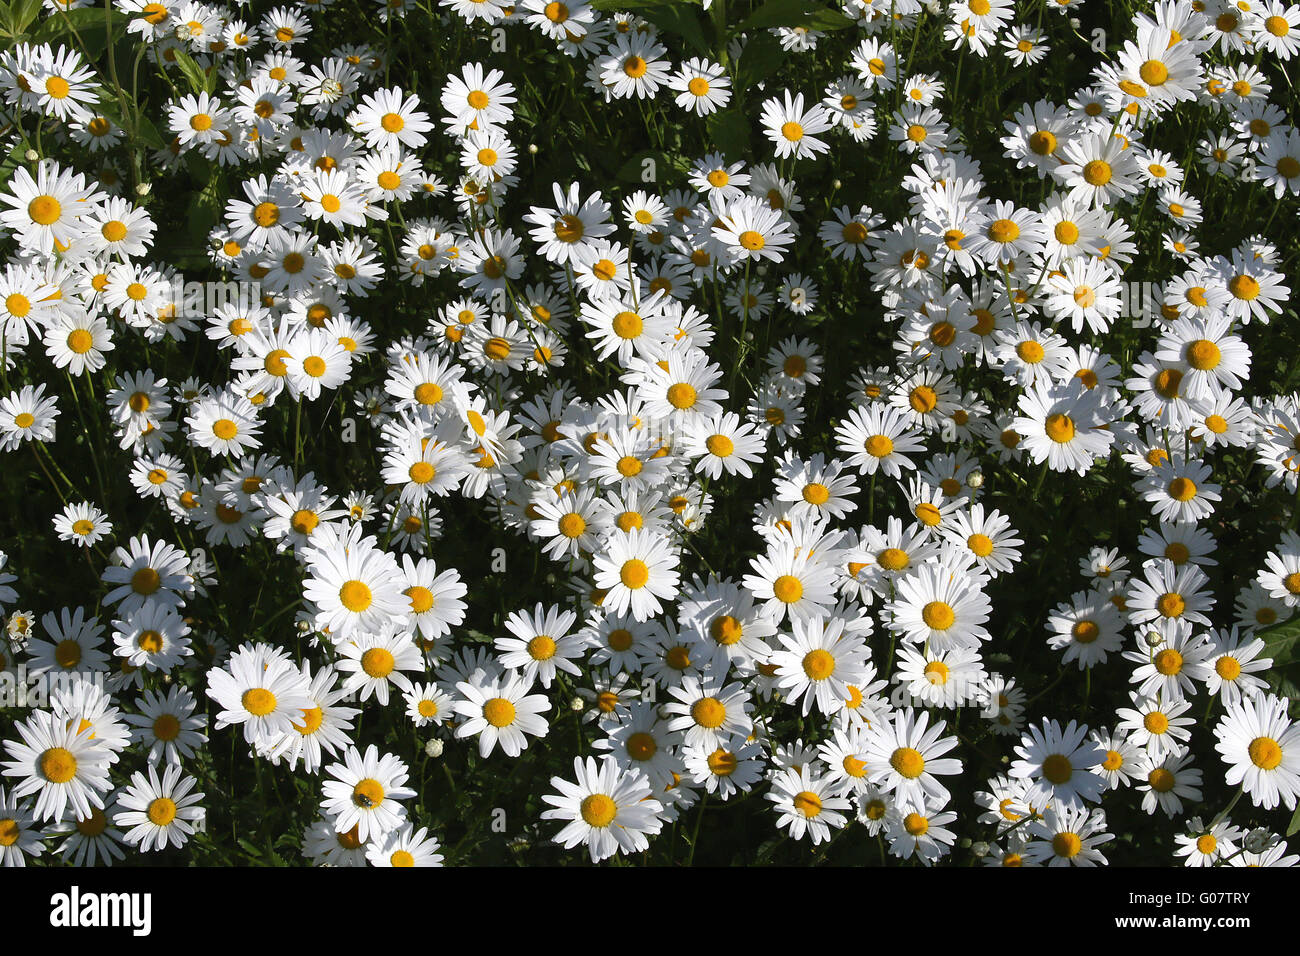 OXEYE DAISY Banque D'Images